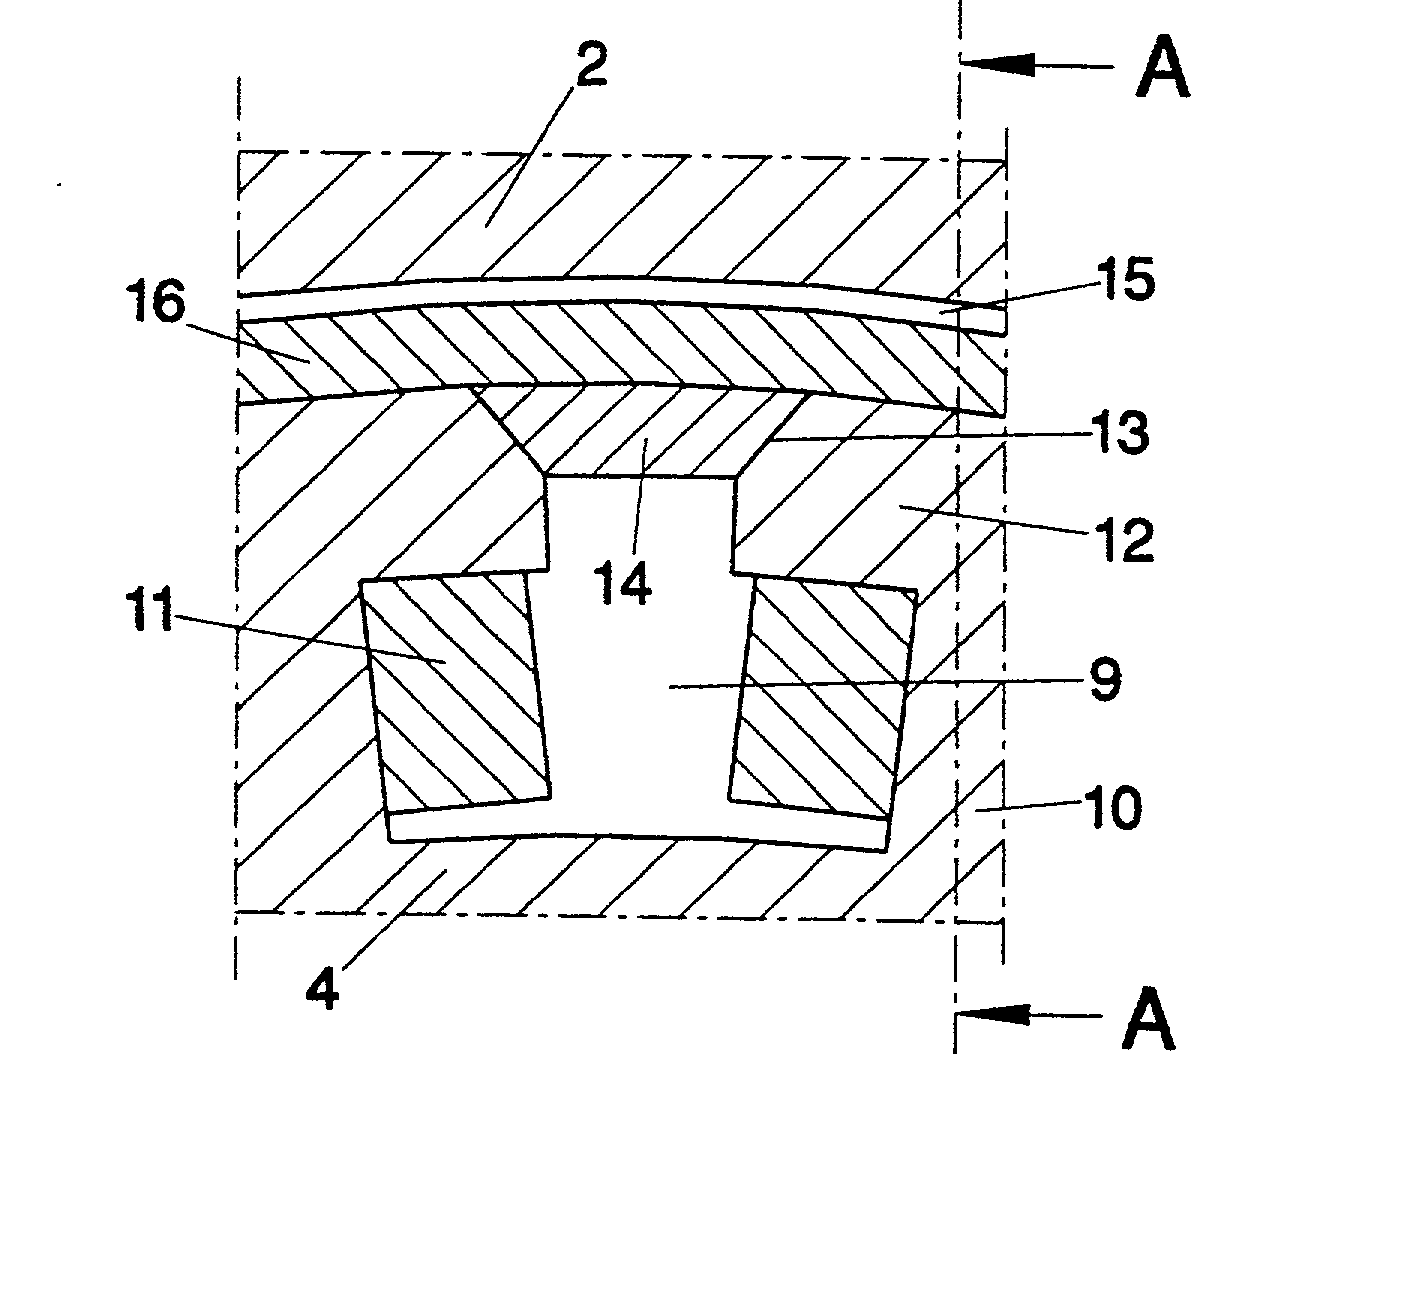 Axial cooling of a rotor